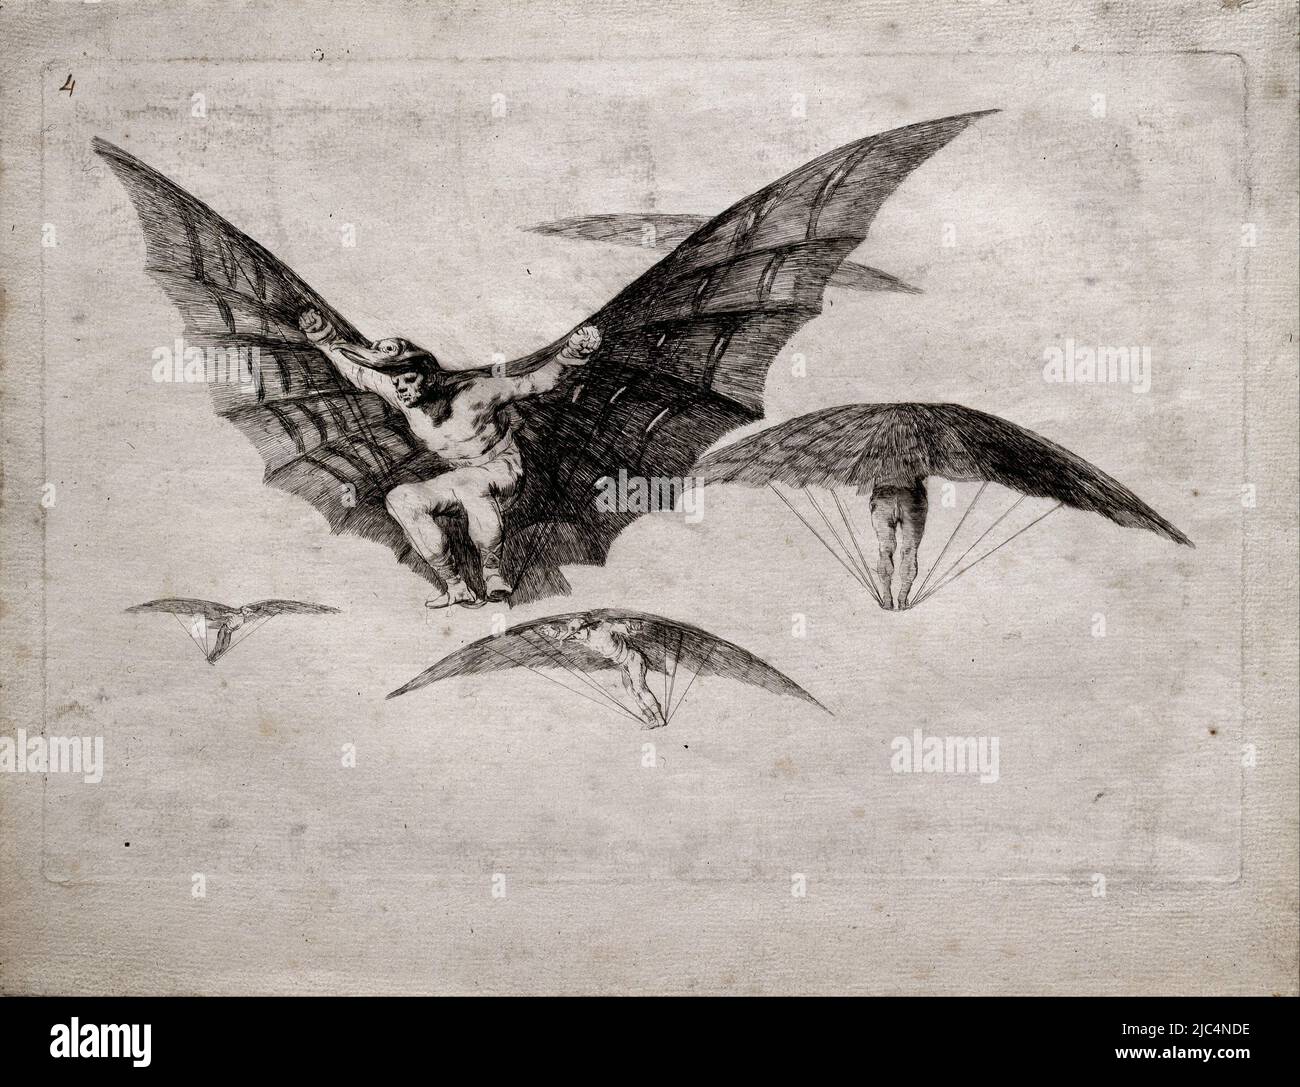 A Way of Flying. Date/Period: 1815 - 1819. Print. Height: 246 mm (9.68 in); Width: 357 mm (14.05 in). Author: FRANCISCO DE GOYA Y LUCIENTES. Stock Photo